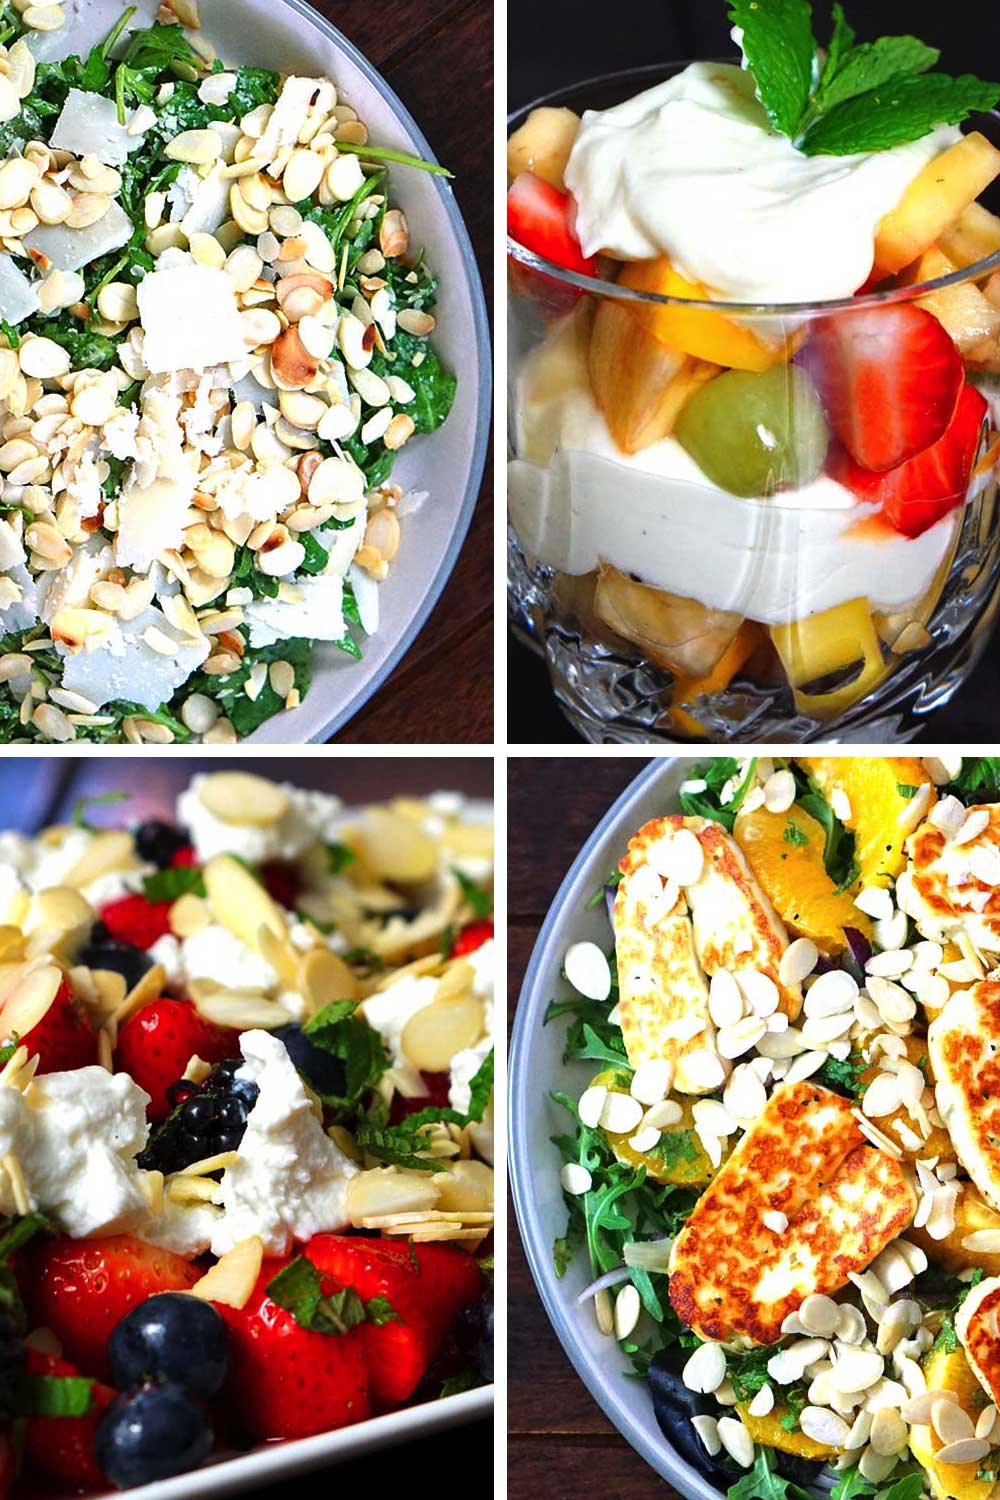 Salad Recipes for All Times of Day